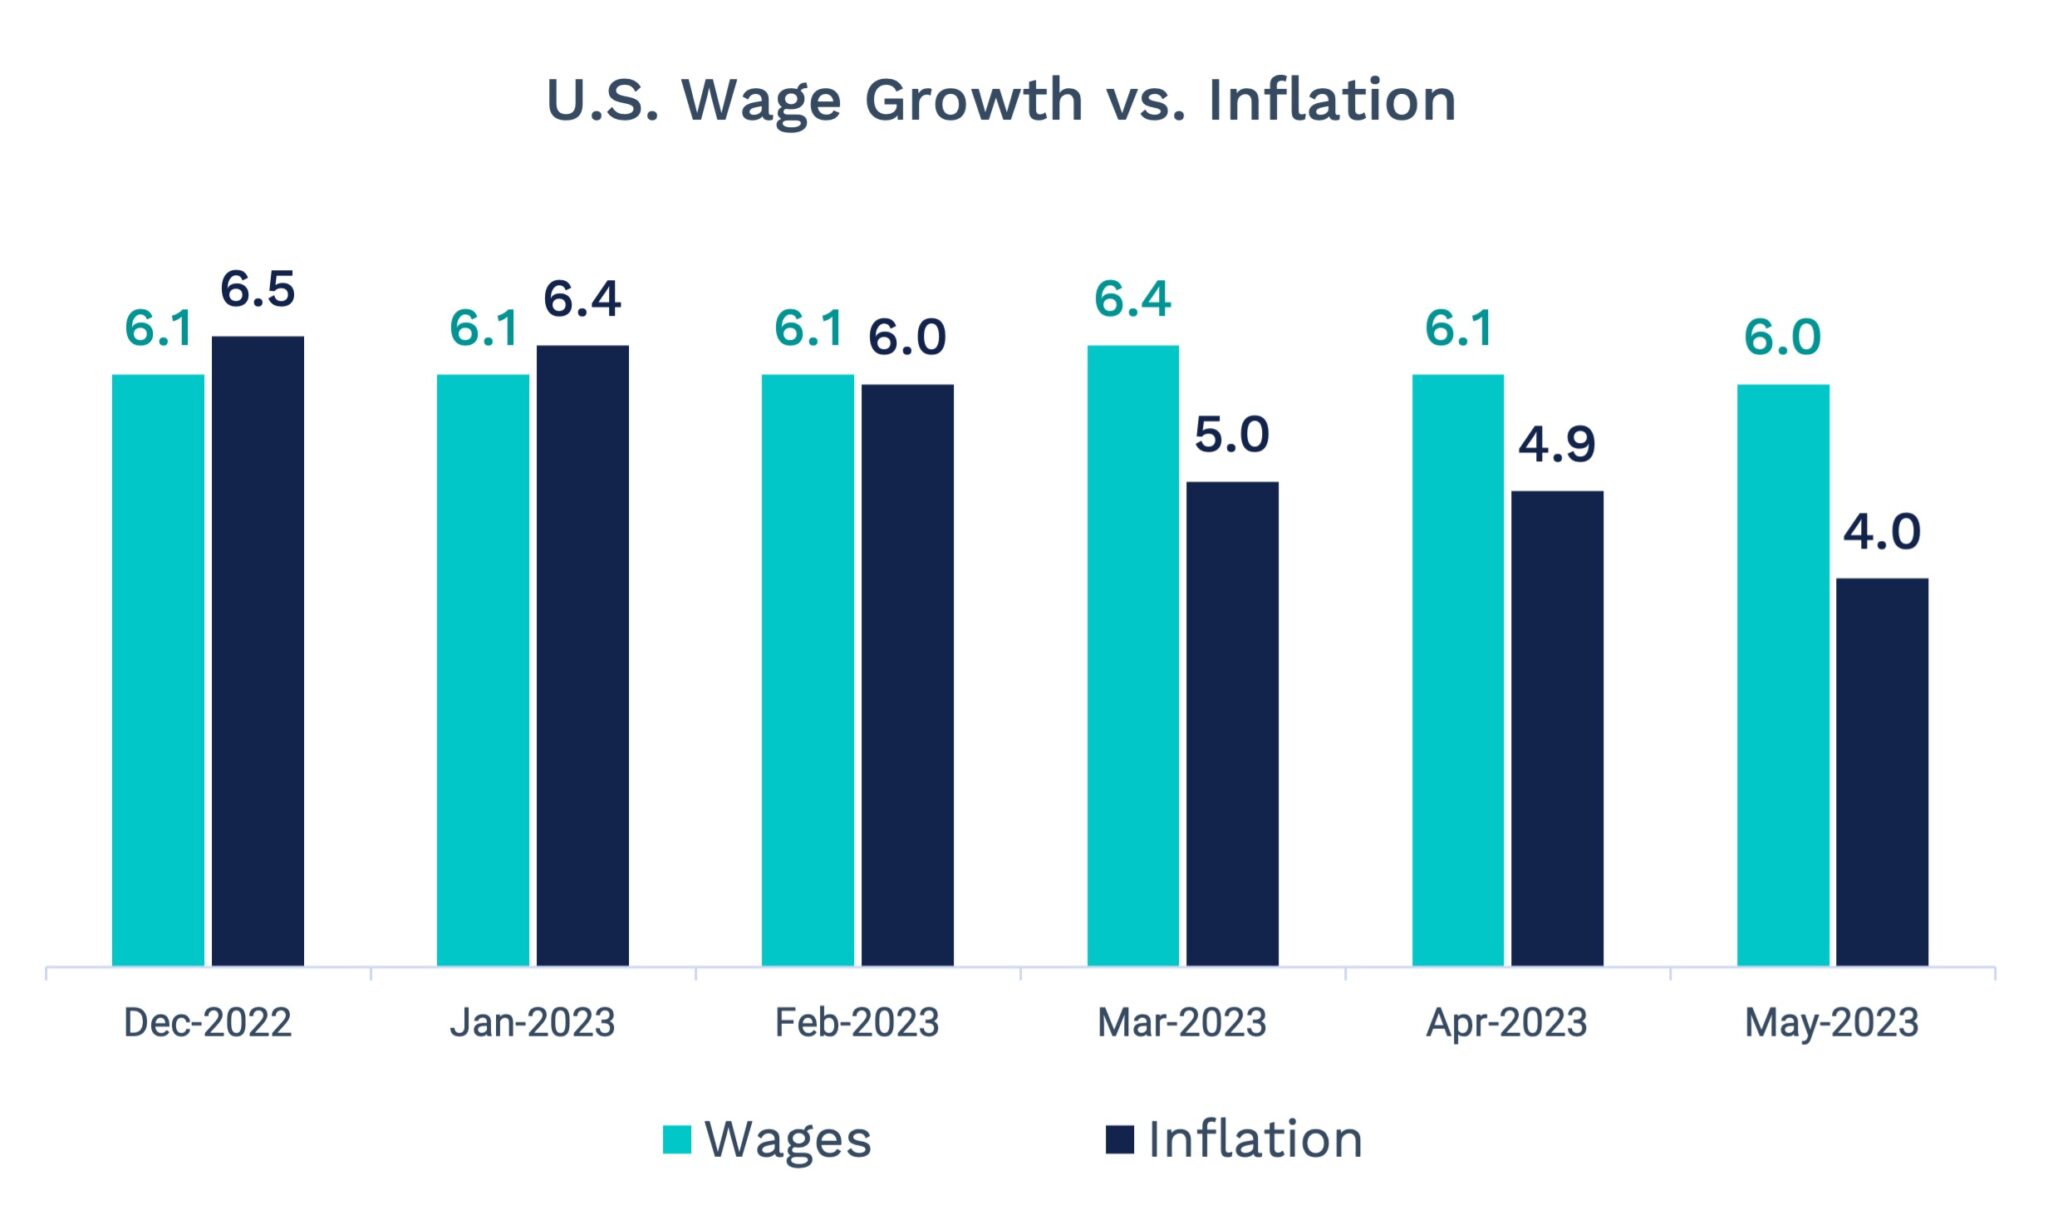 column chart - wage growth vs inflation - Dec 2022-May 2023